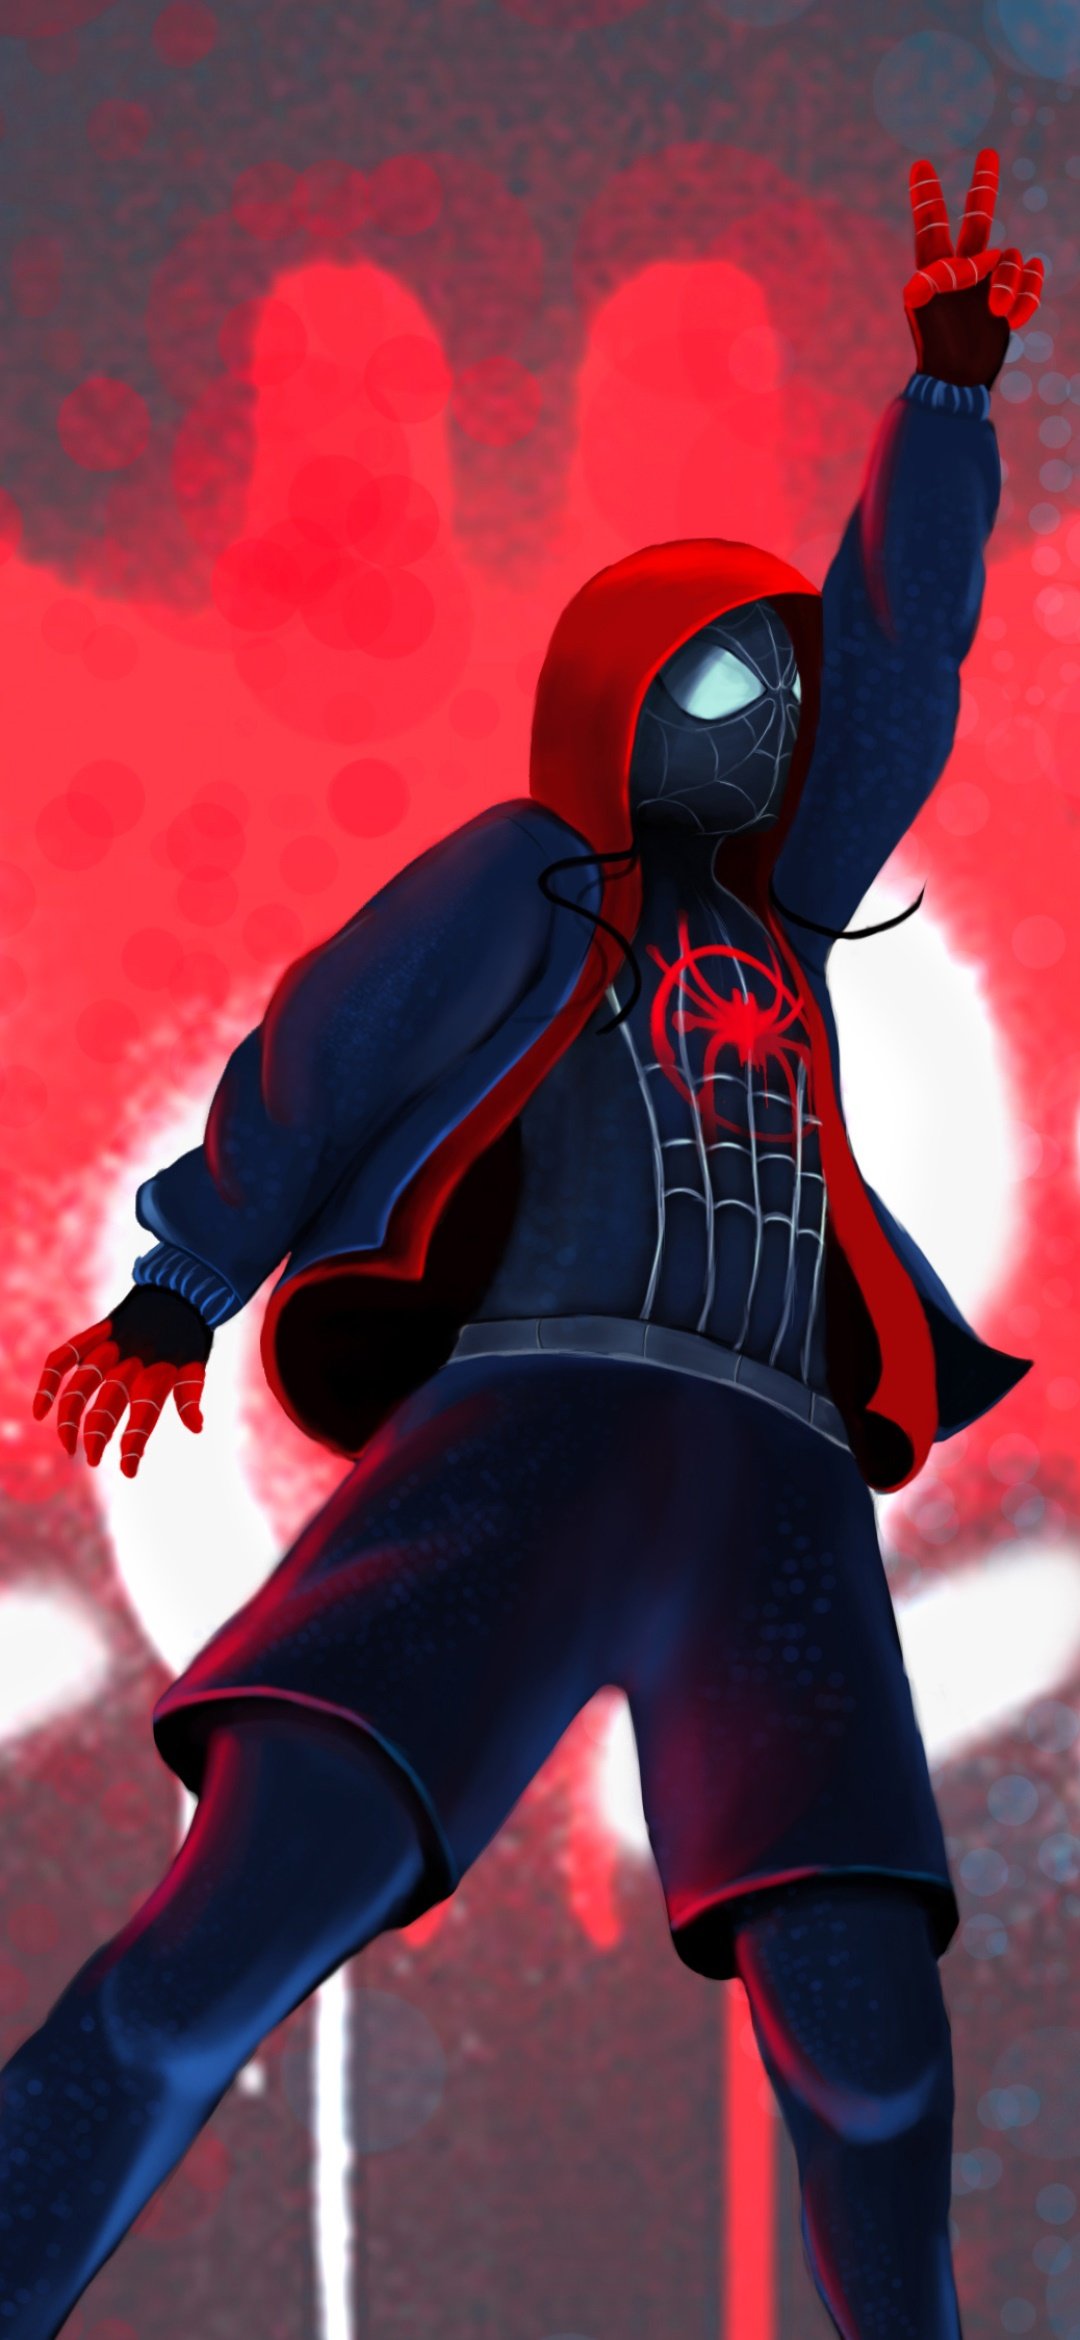 Full HD 1080p Spider Man: Across The Spider Verse Phone Wallpaper Wallpaper Free Download